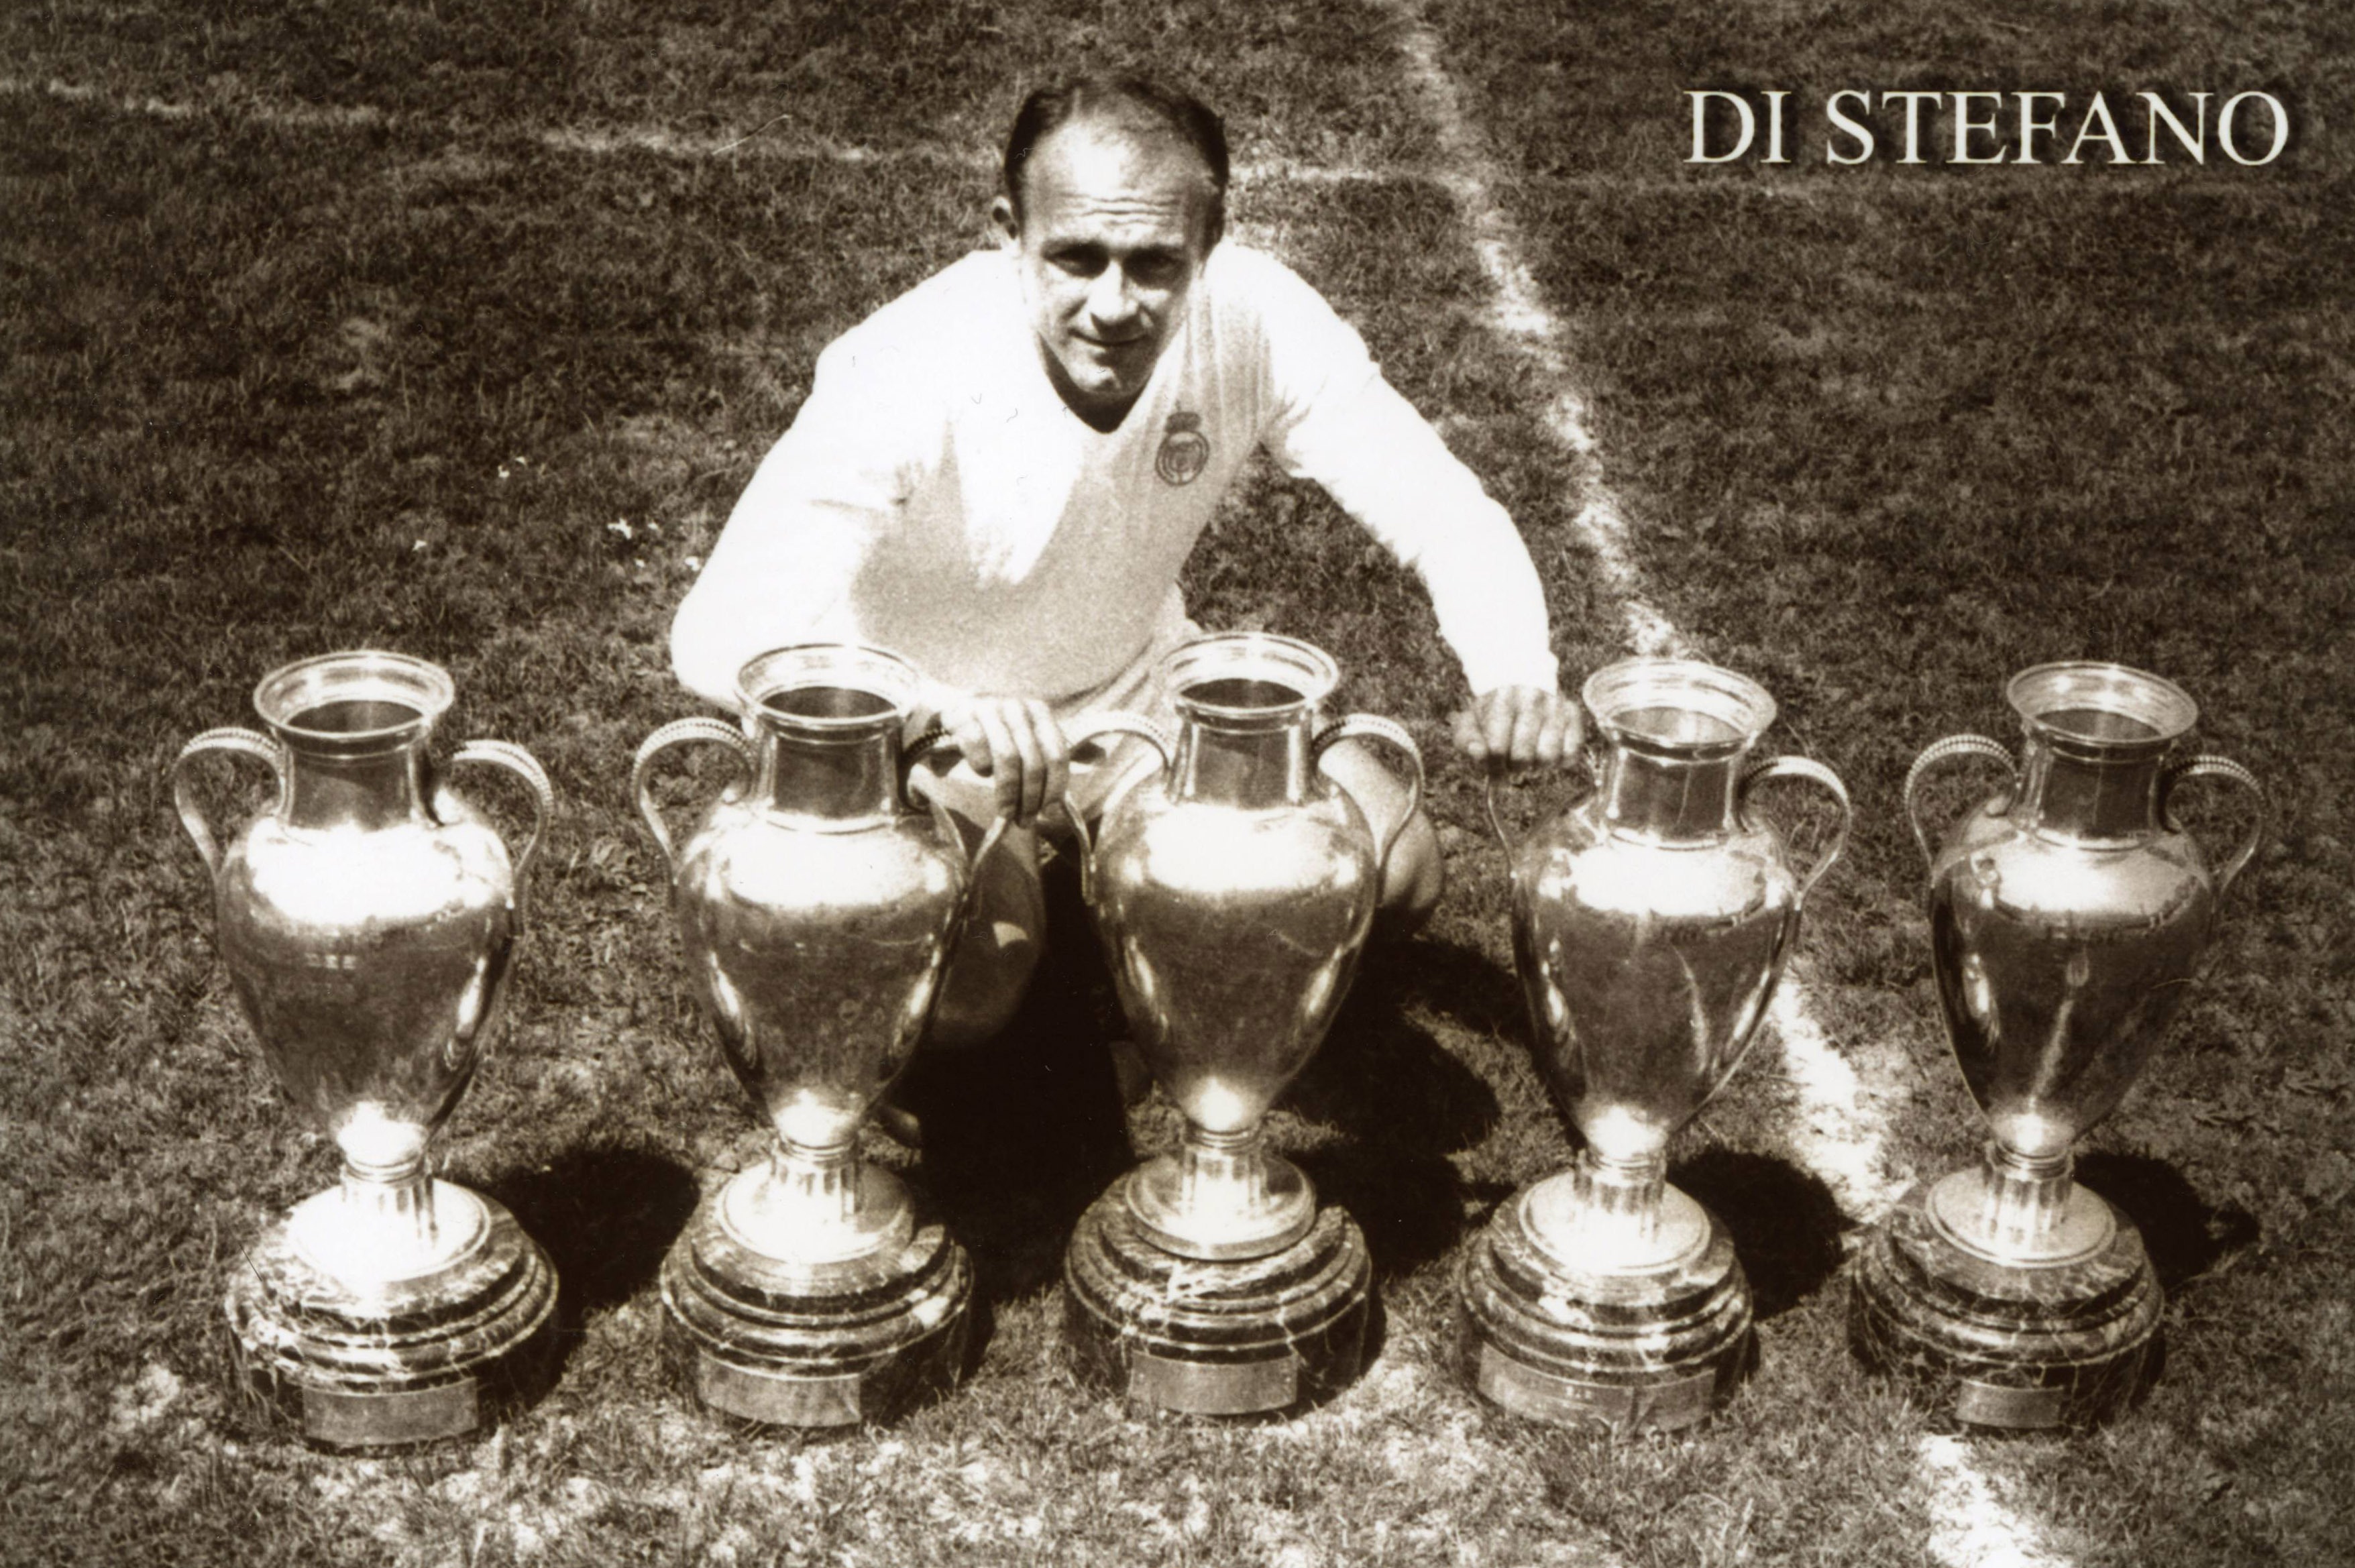 Alfredo Di Stefano poses with the European Cup trophies he won as a Real Madrid player.